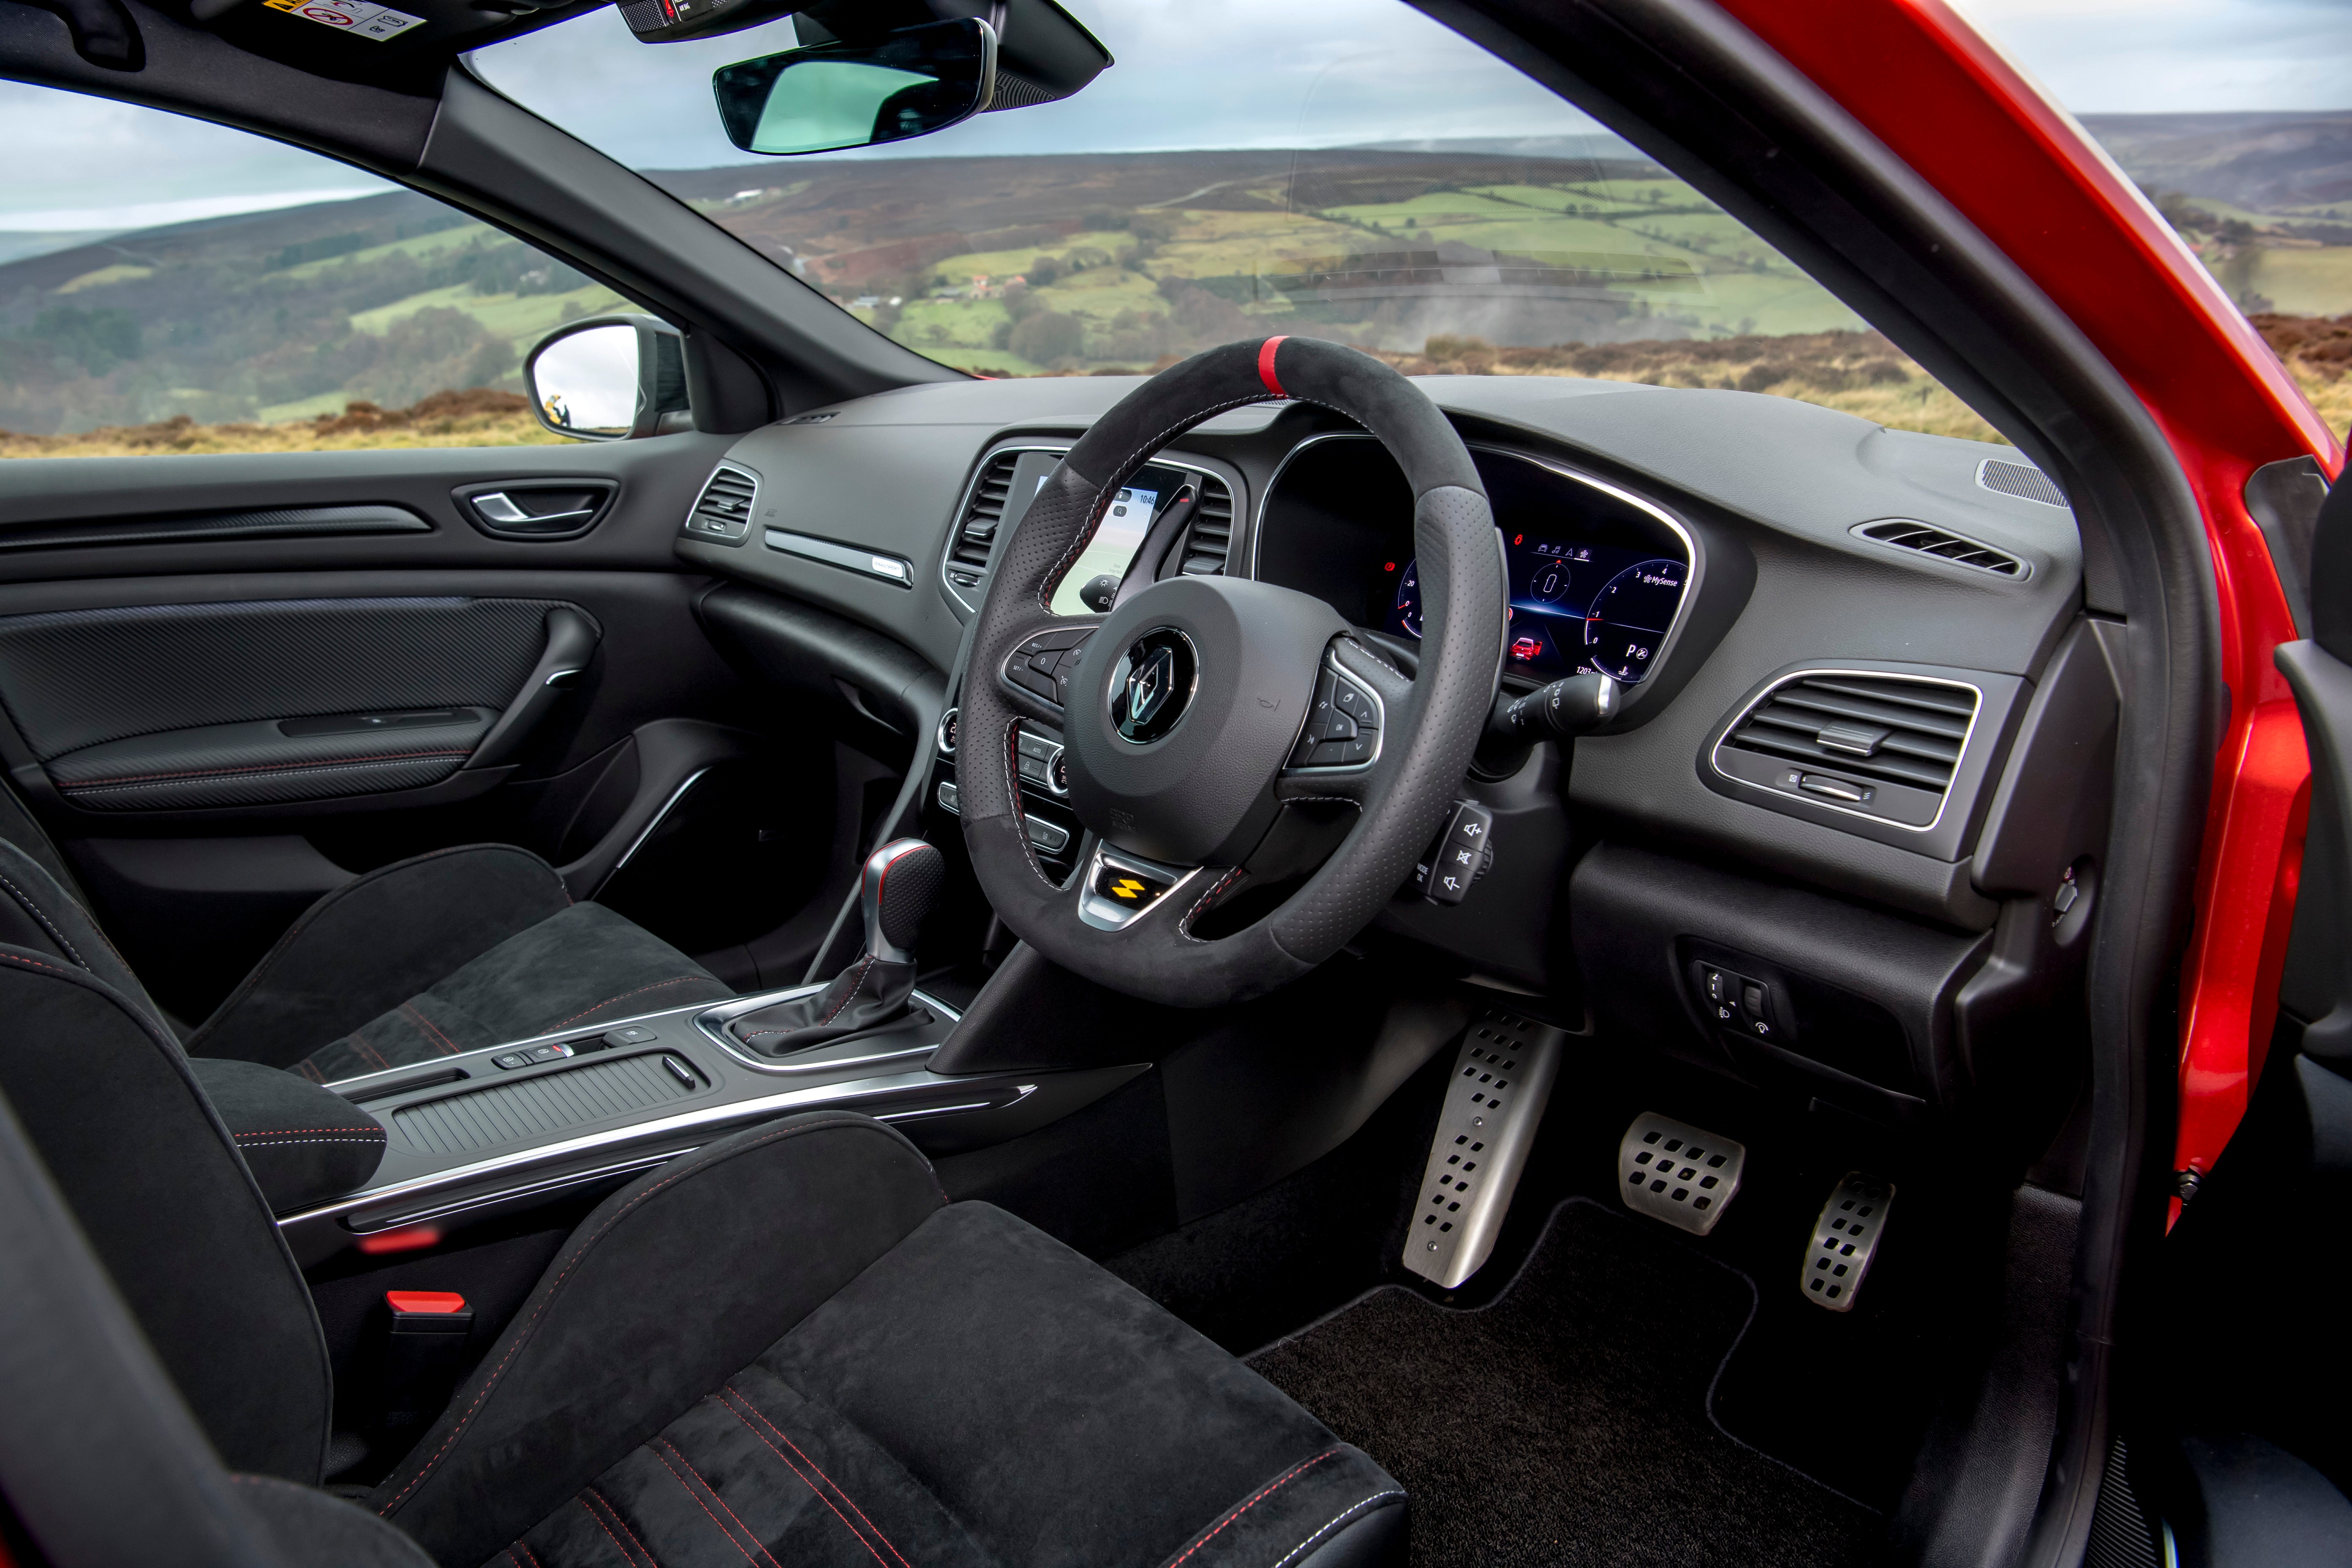 The Megane's interior feels well built and purposeful